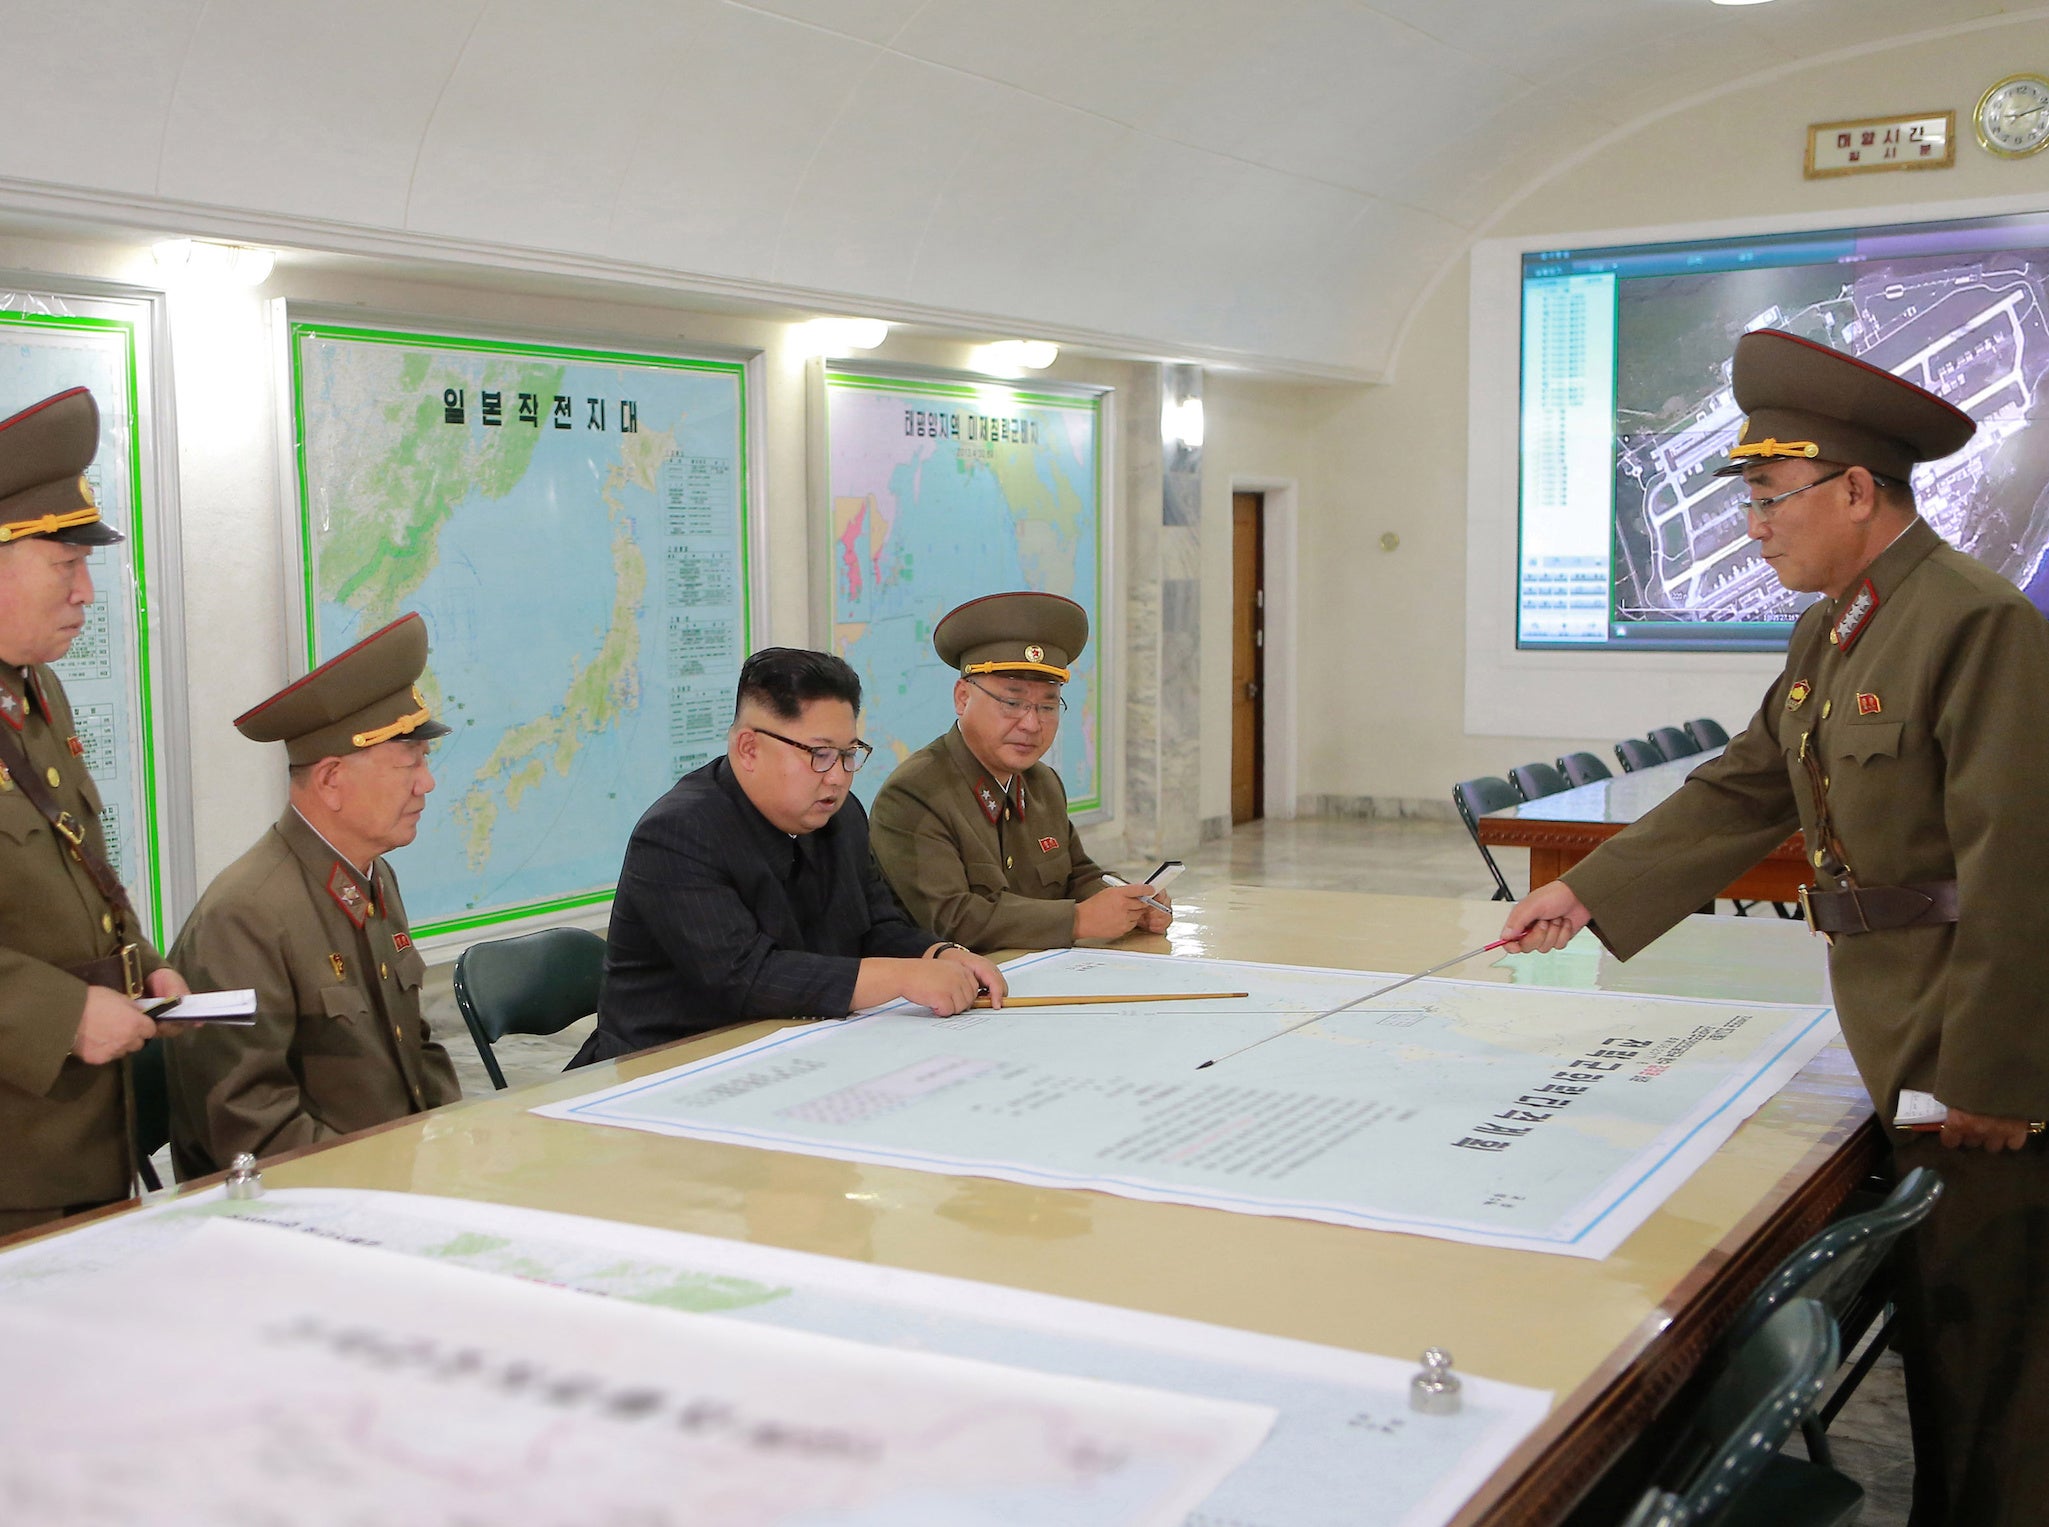 The photo released by KCNA agency appears to show North Korean leader Kim Jong-Un studying an outdated map of Anderson Air Base, Guam